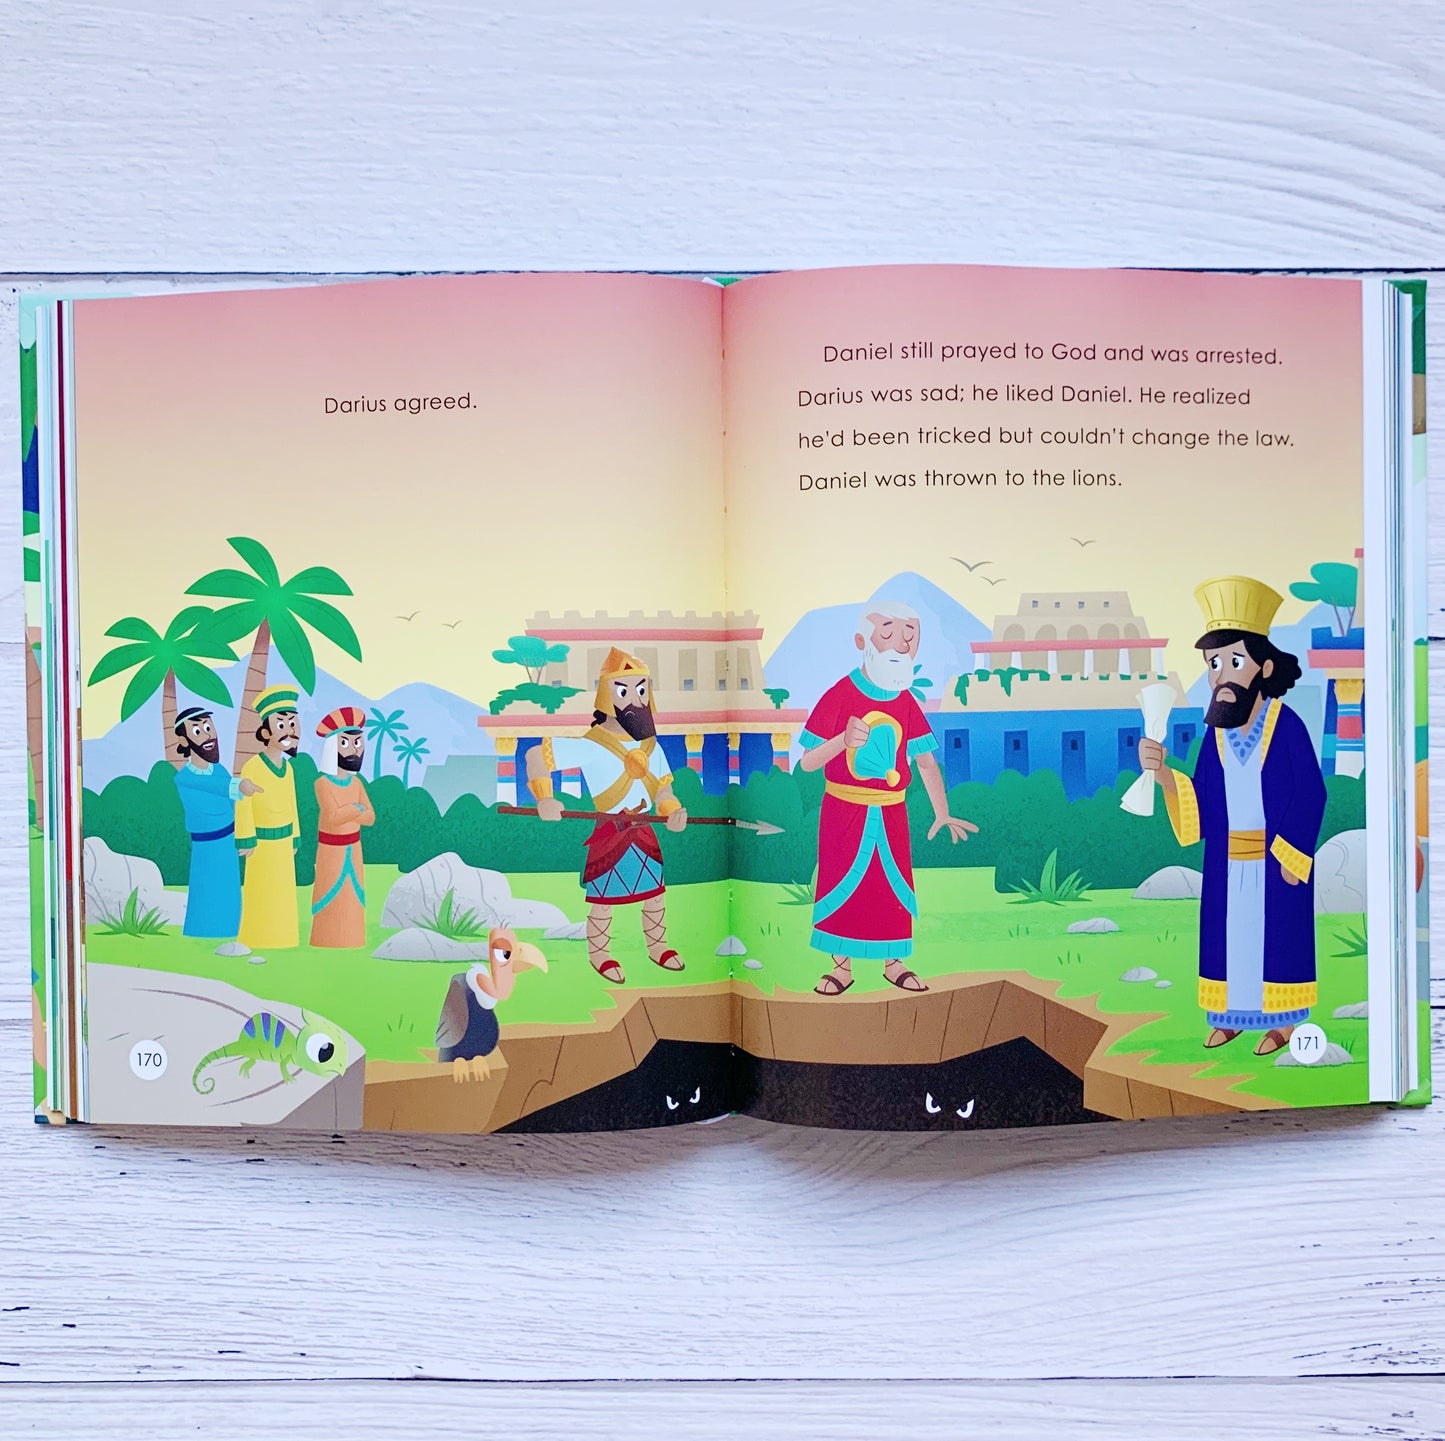 Bible Storybook: from The Bible App for Kids